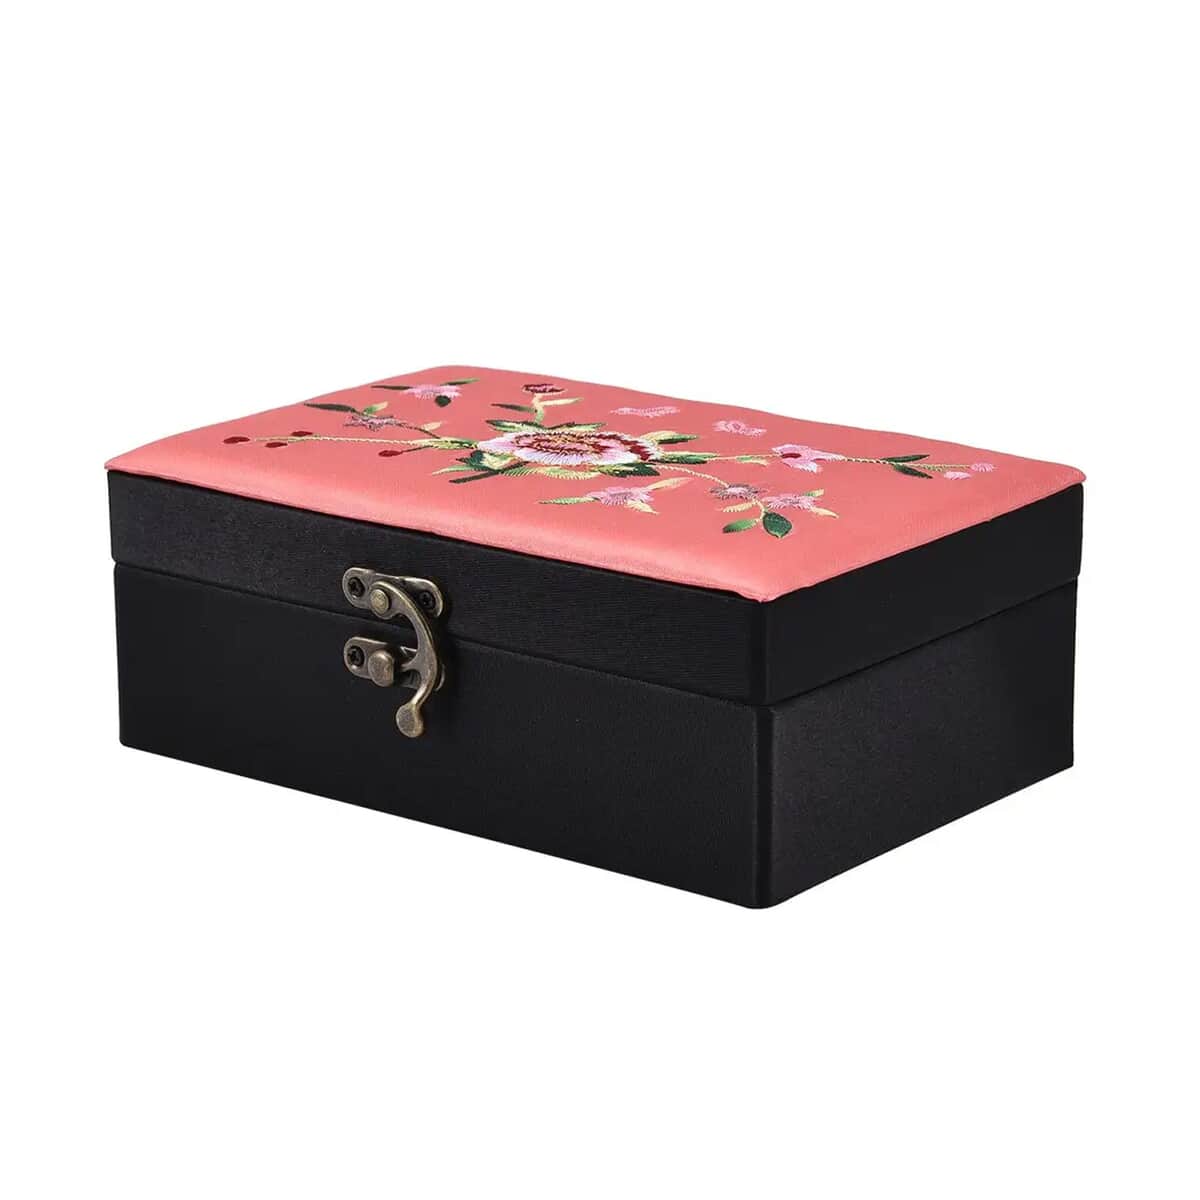 Orange Flower Pattern Embroidery Satin Jewelry Box with Lock image number 4